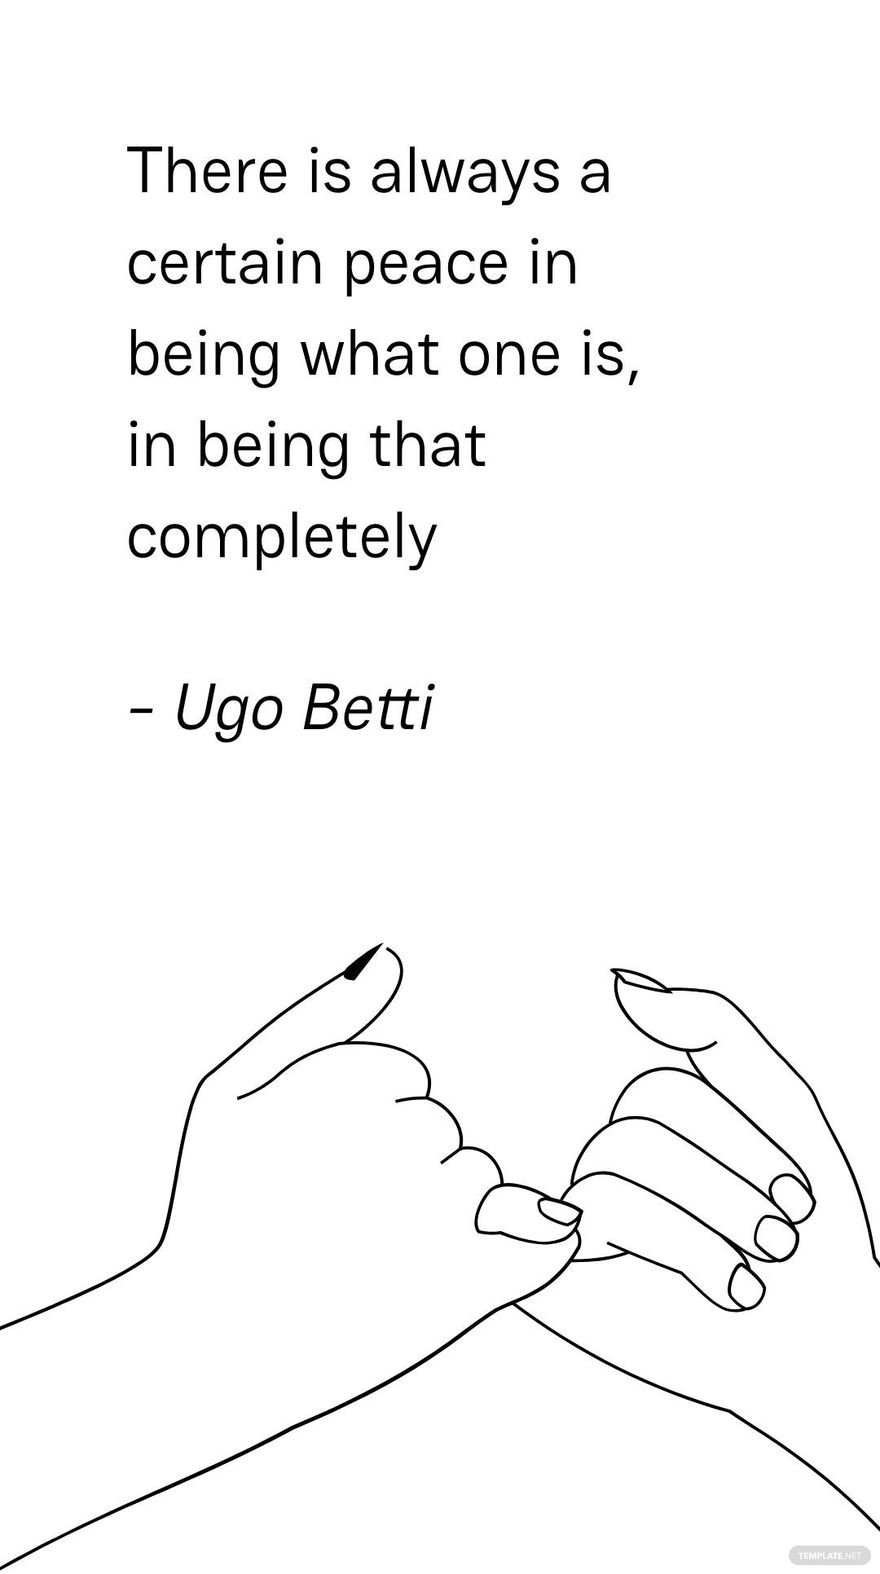 Ugo Betti - There is always a certain peace in being what one is, in being that completely